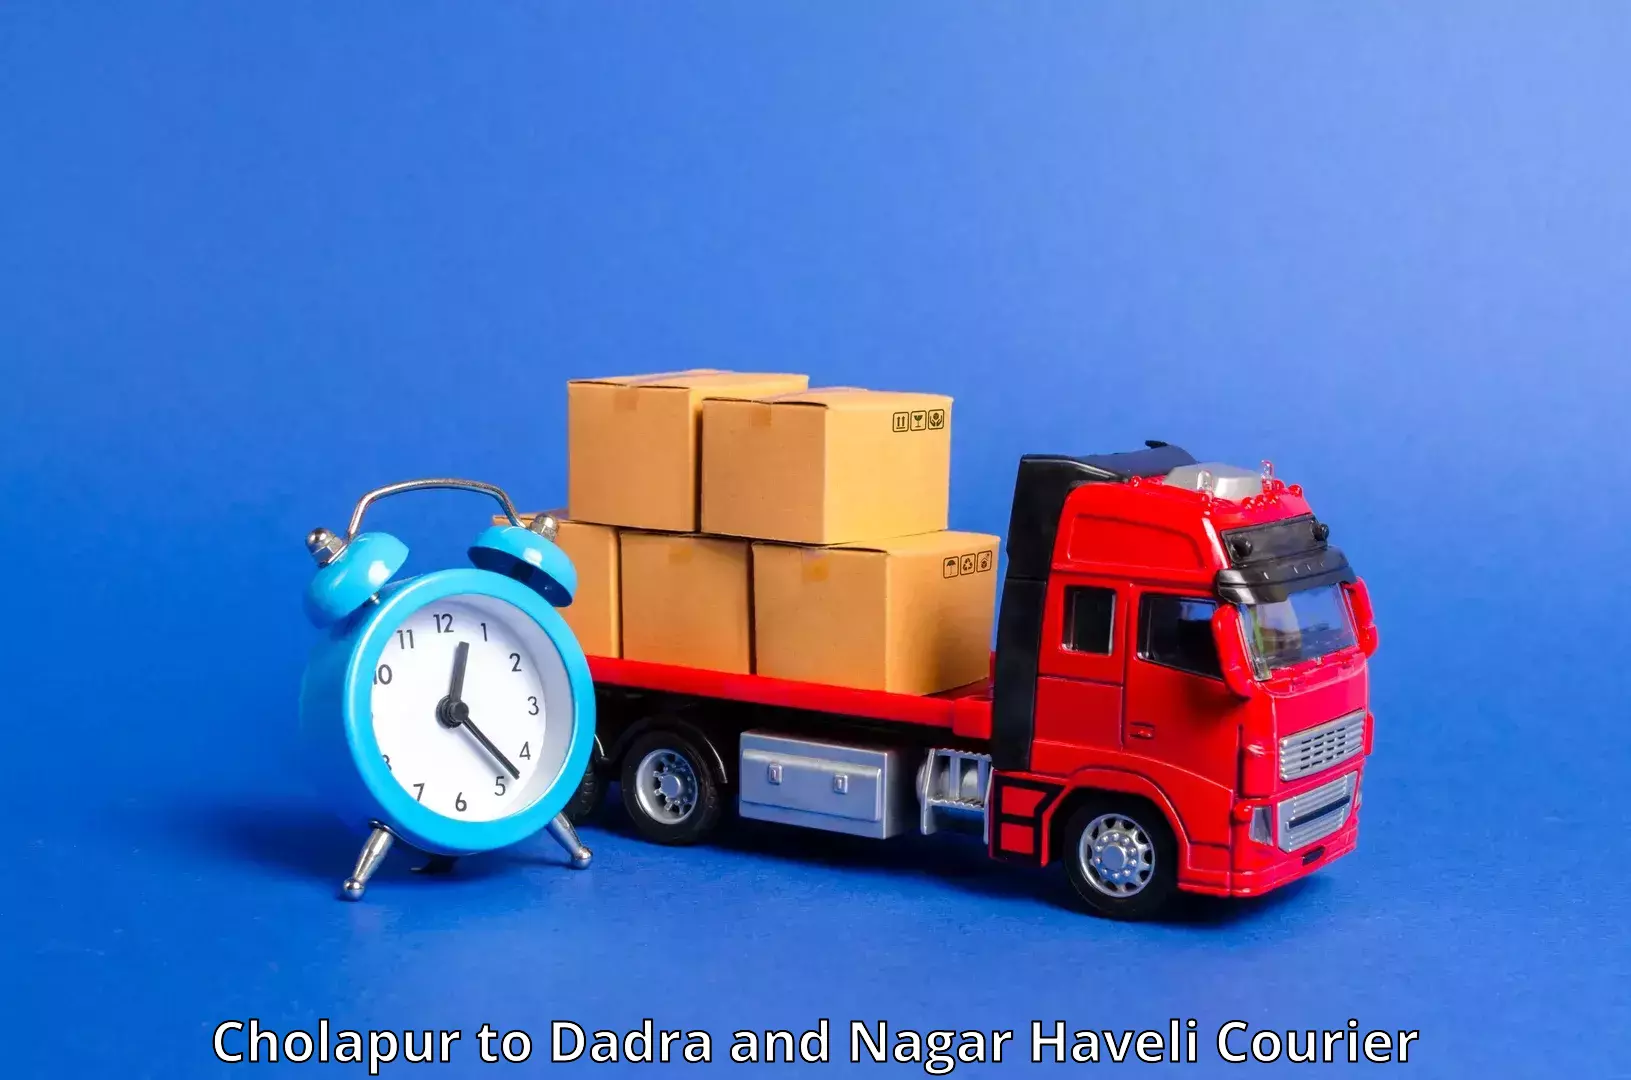 State-of-the-art courier technology Cholapur to Silvassa